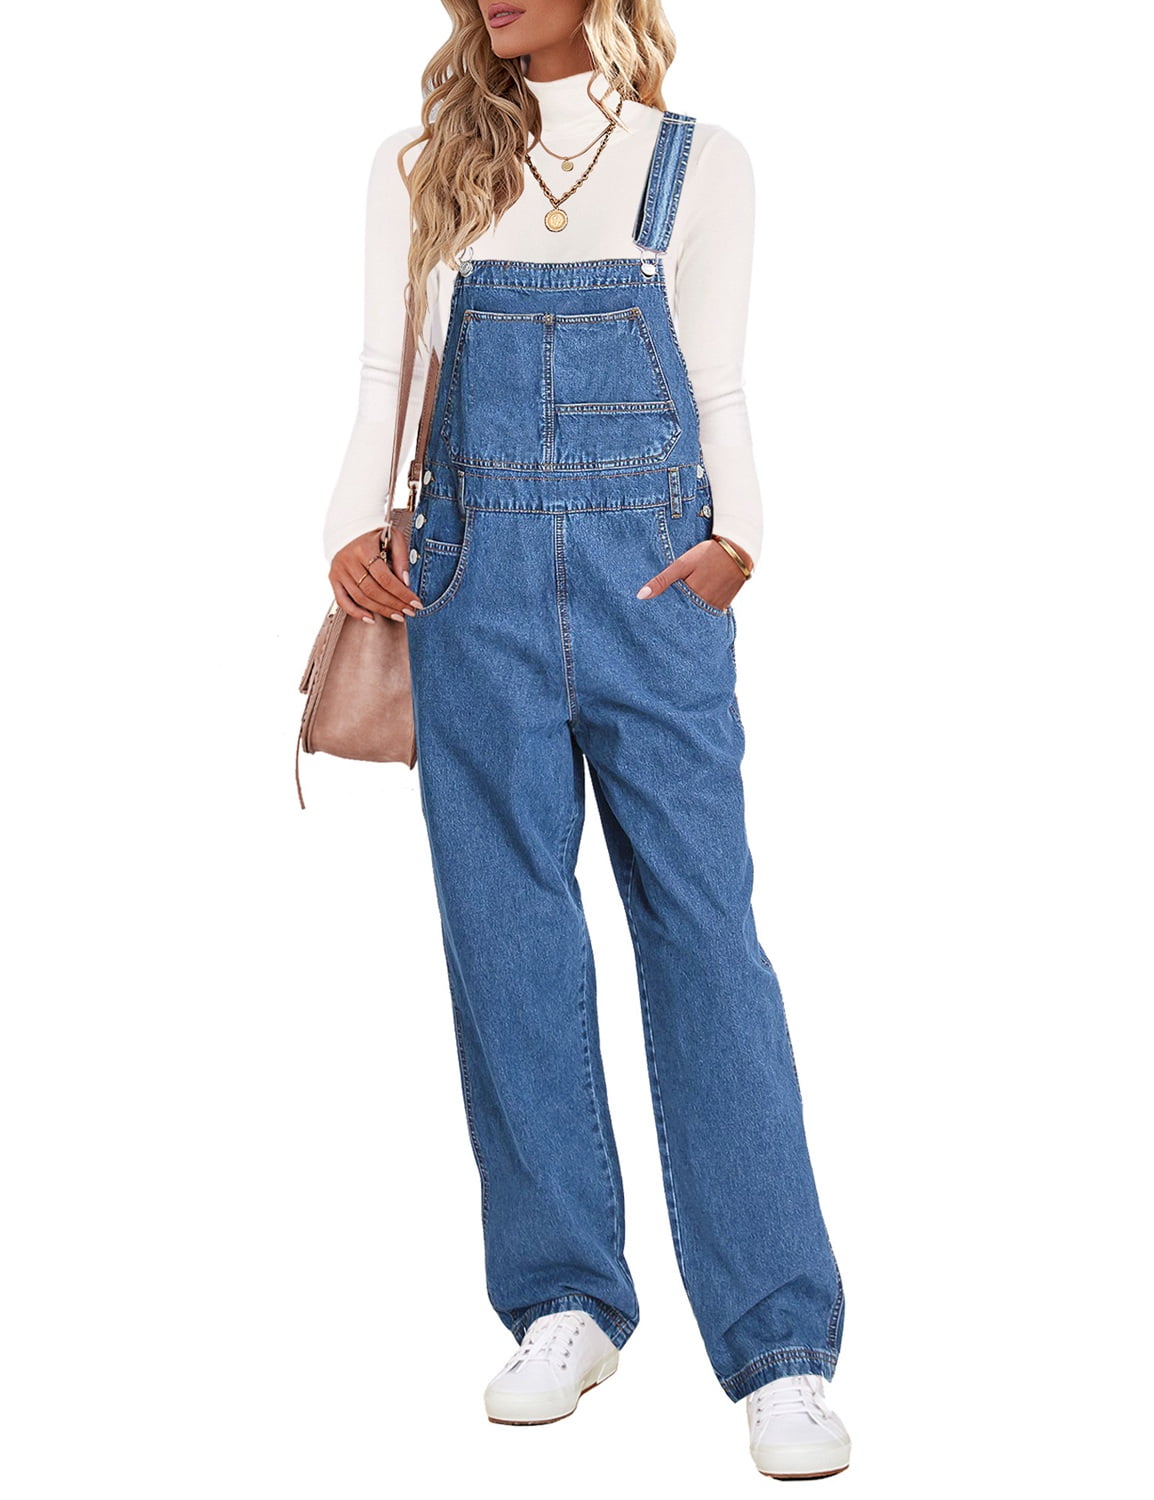 Vetinee Blue Denim Overalls for Women Casual Fall Classic Adjustable ...